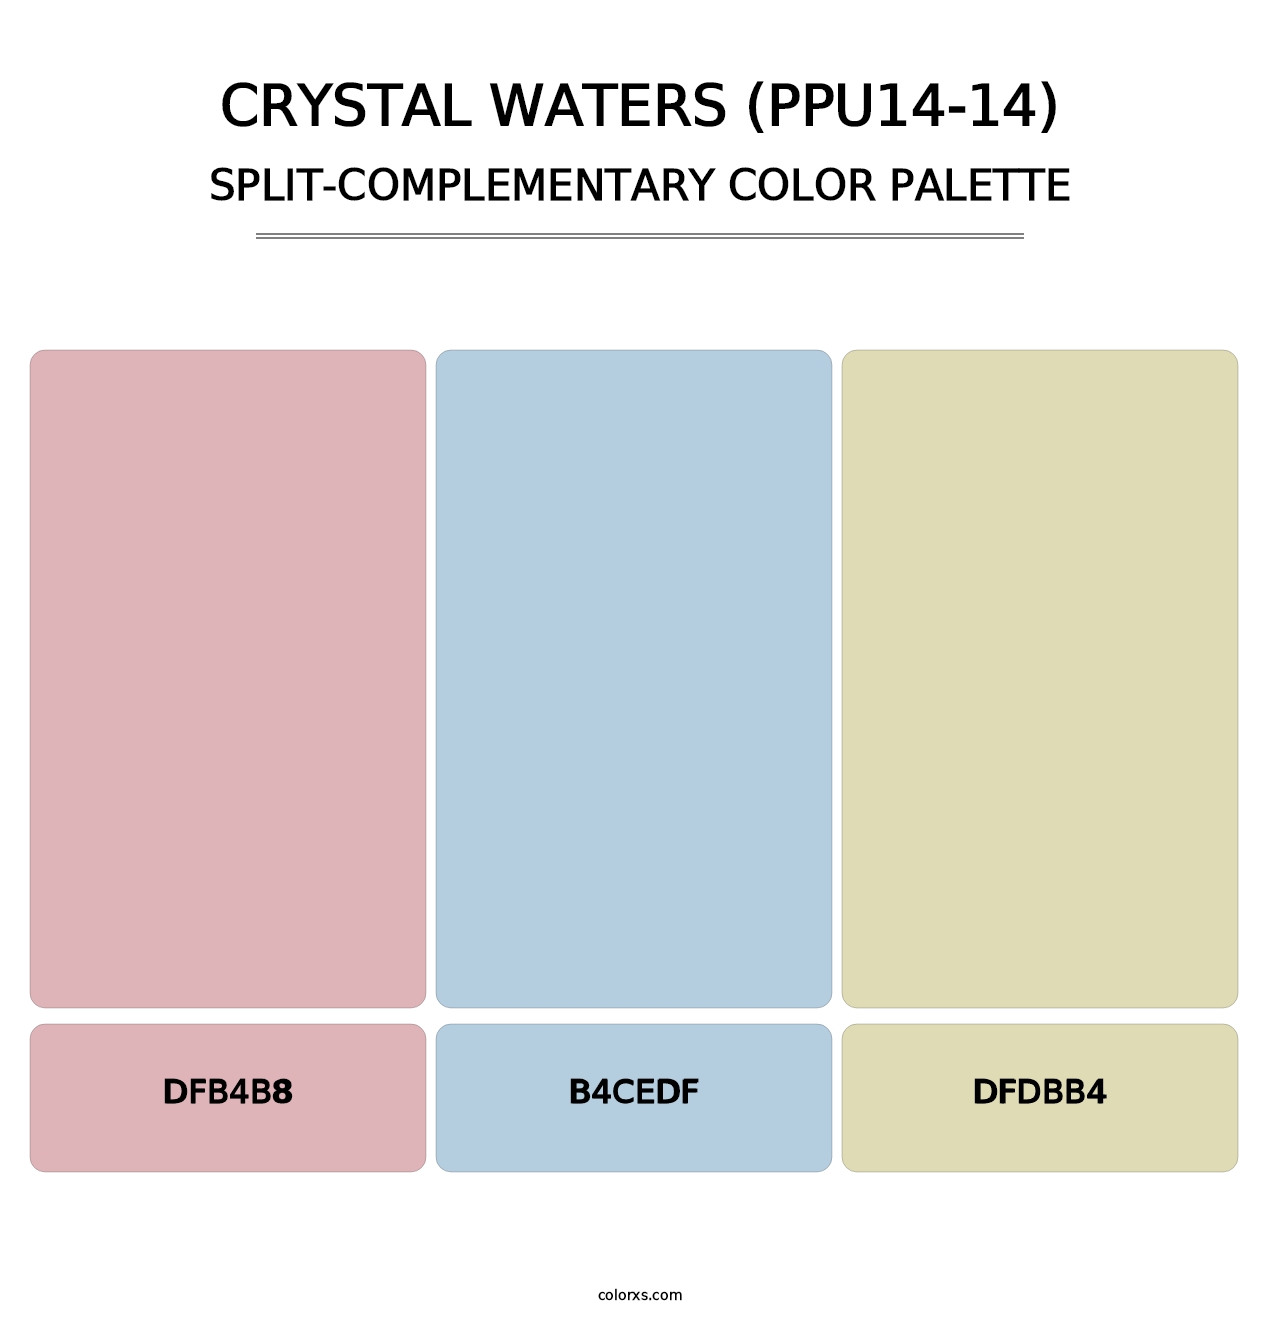 Crystal Waters (PPU14-14) - Split-Complementary Color Palette